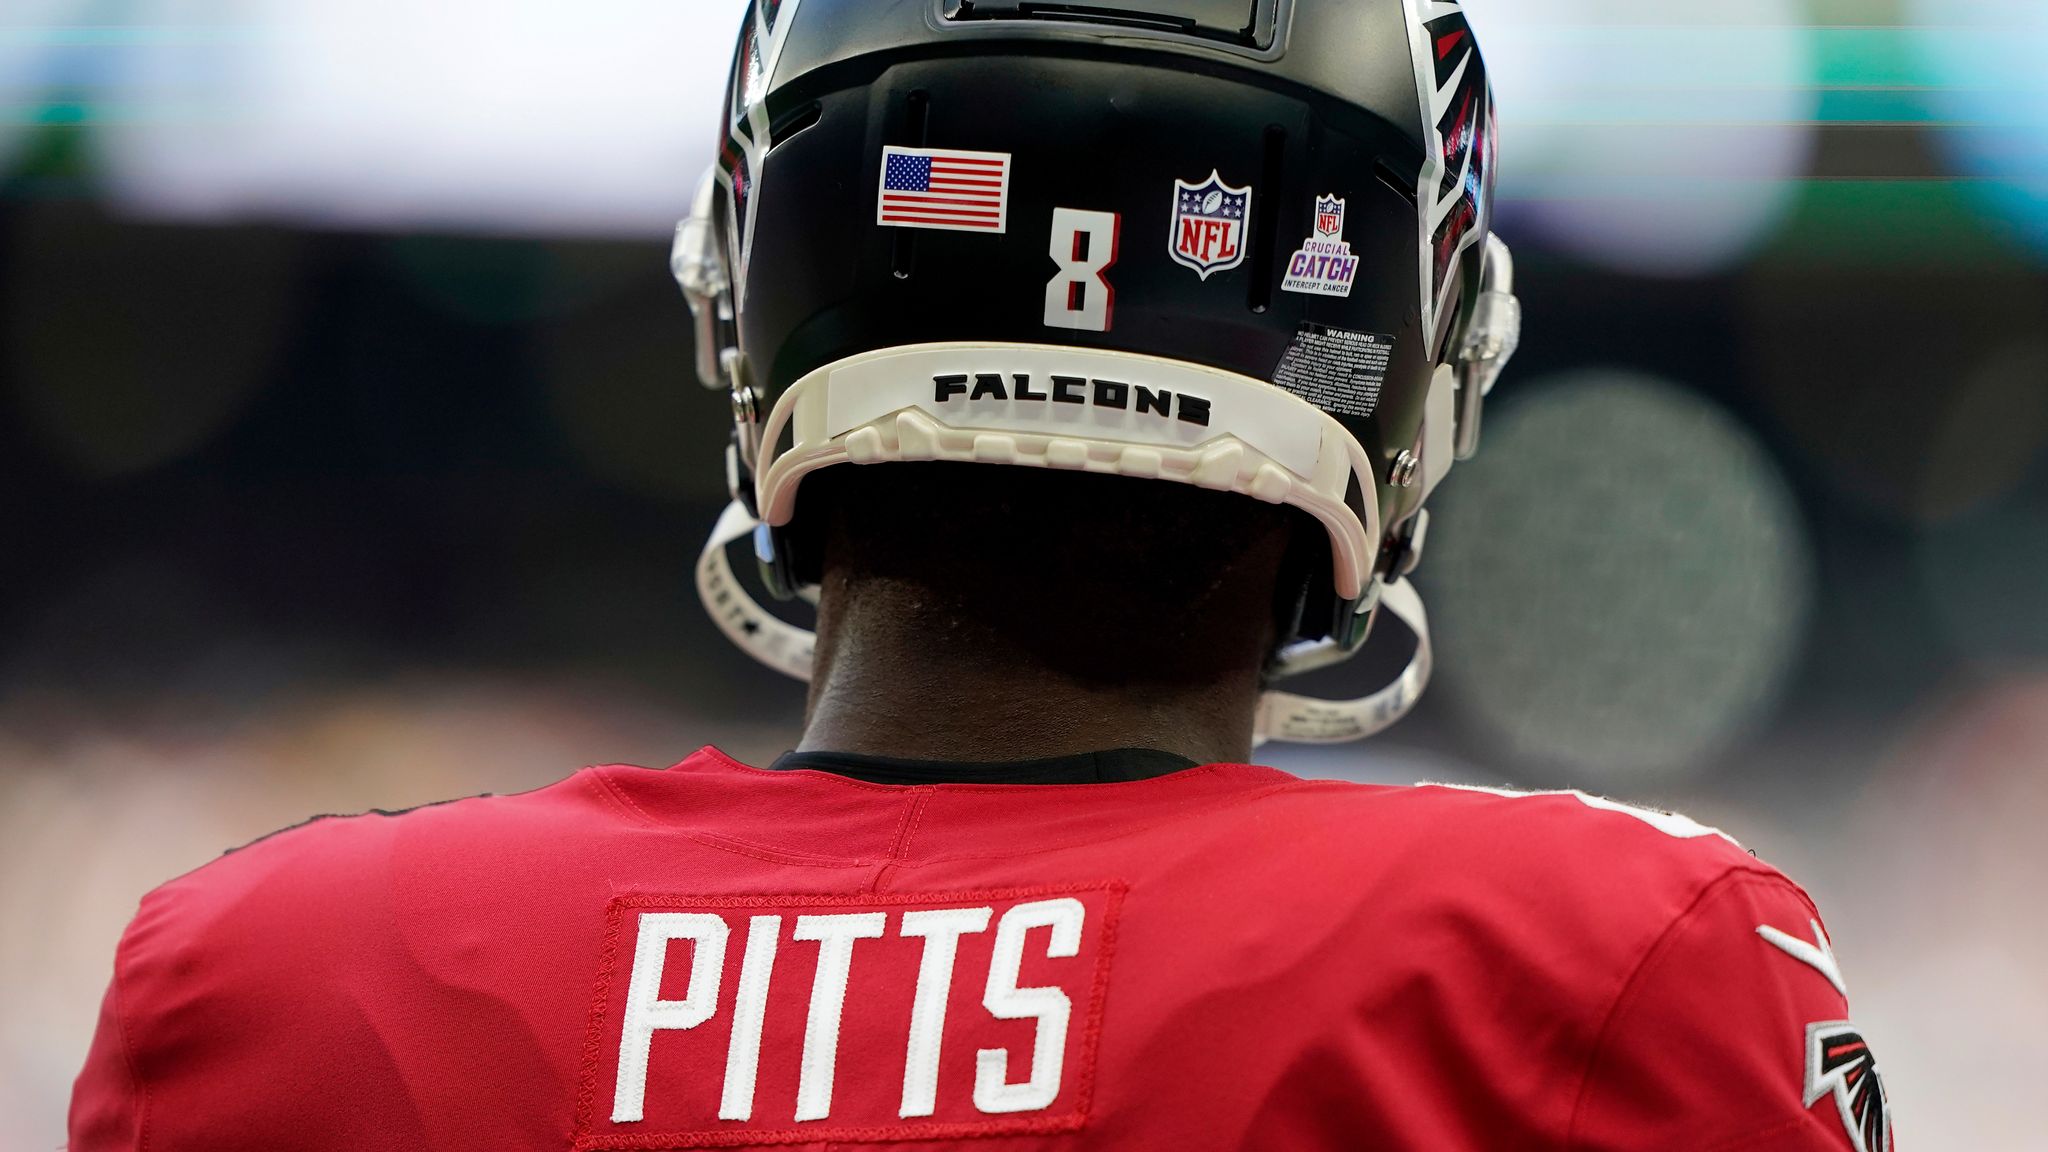 falcons pitts